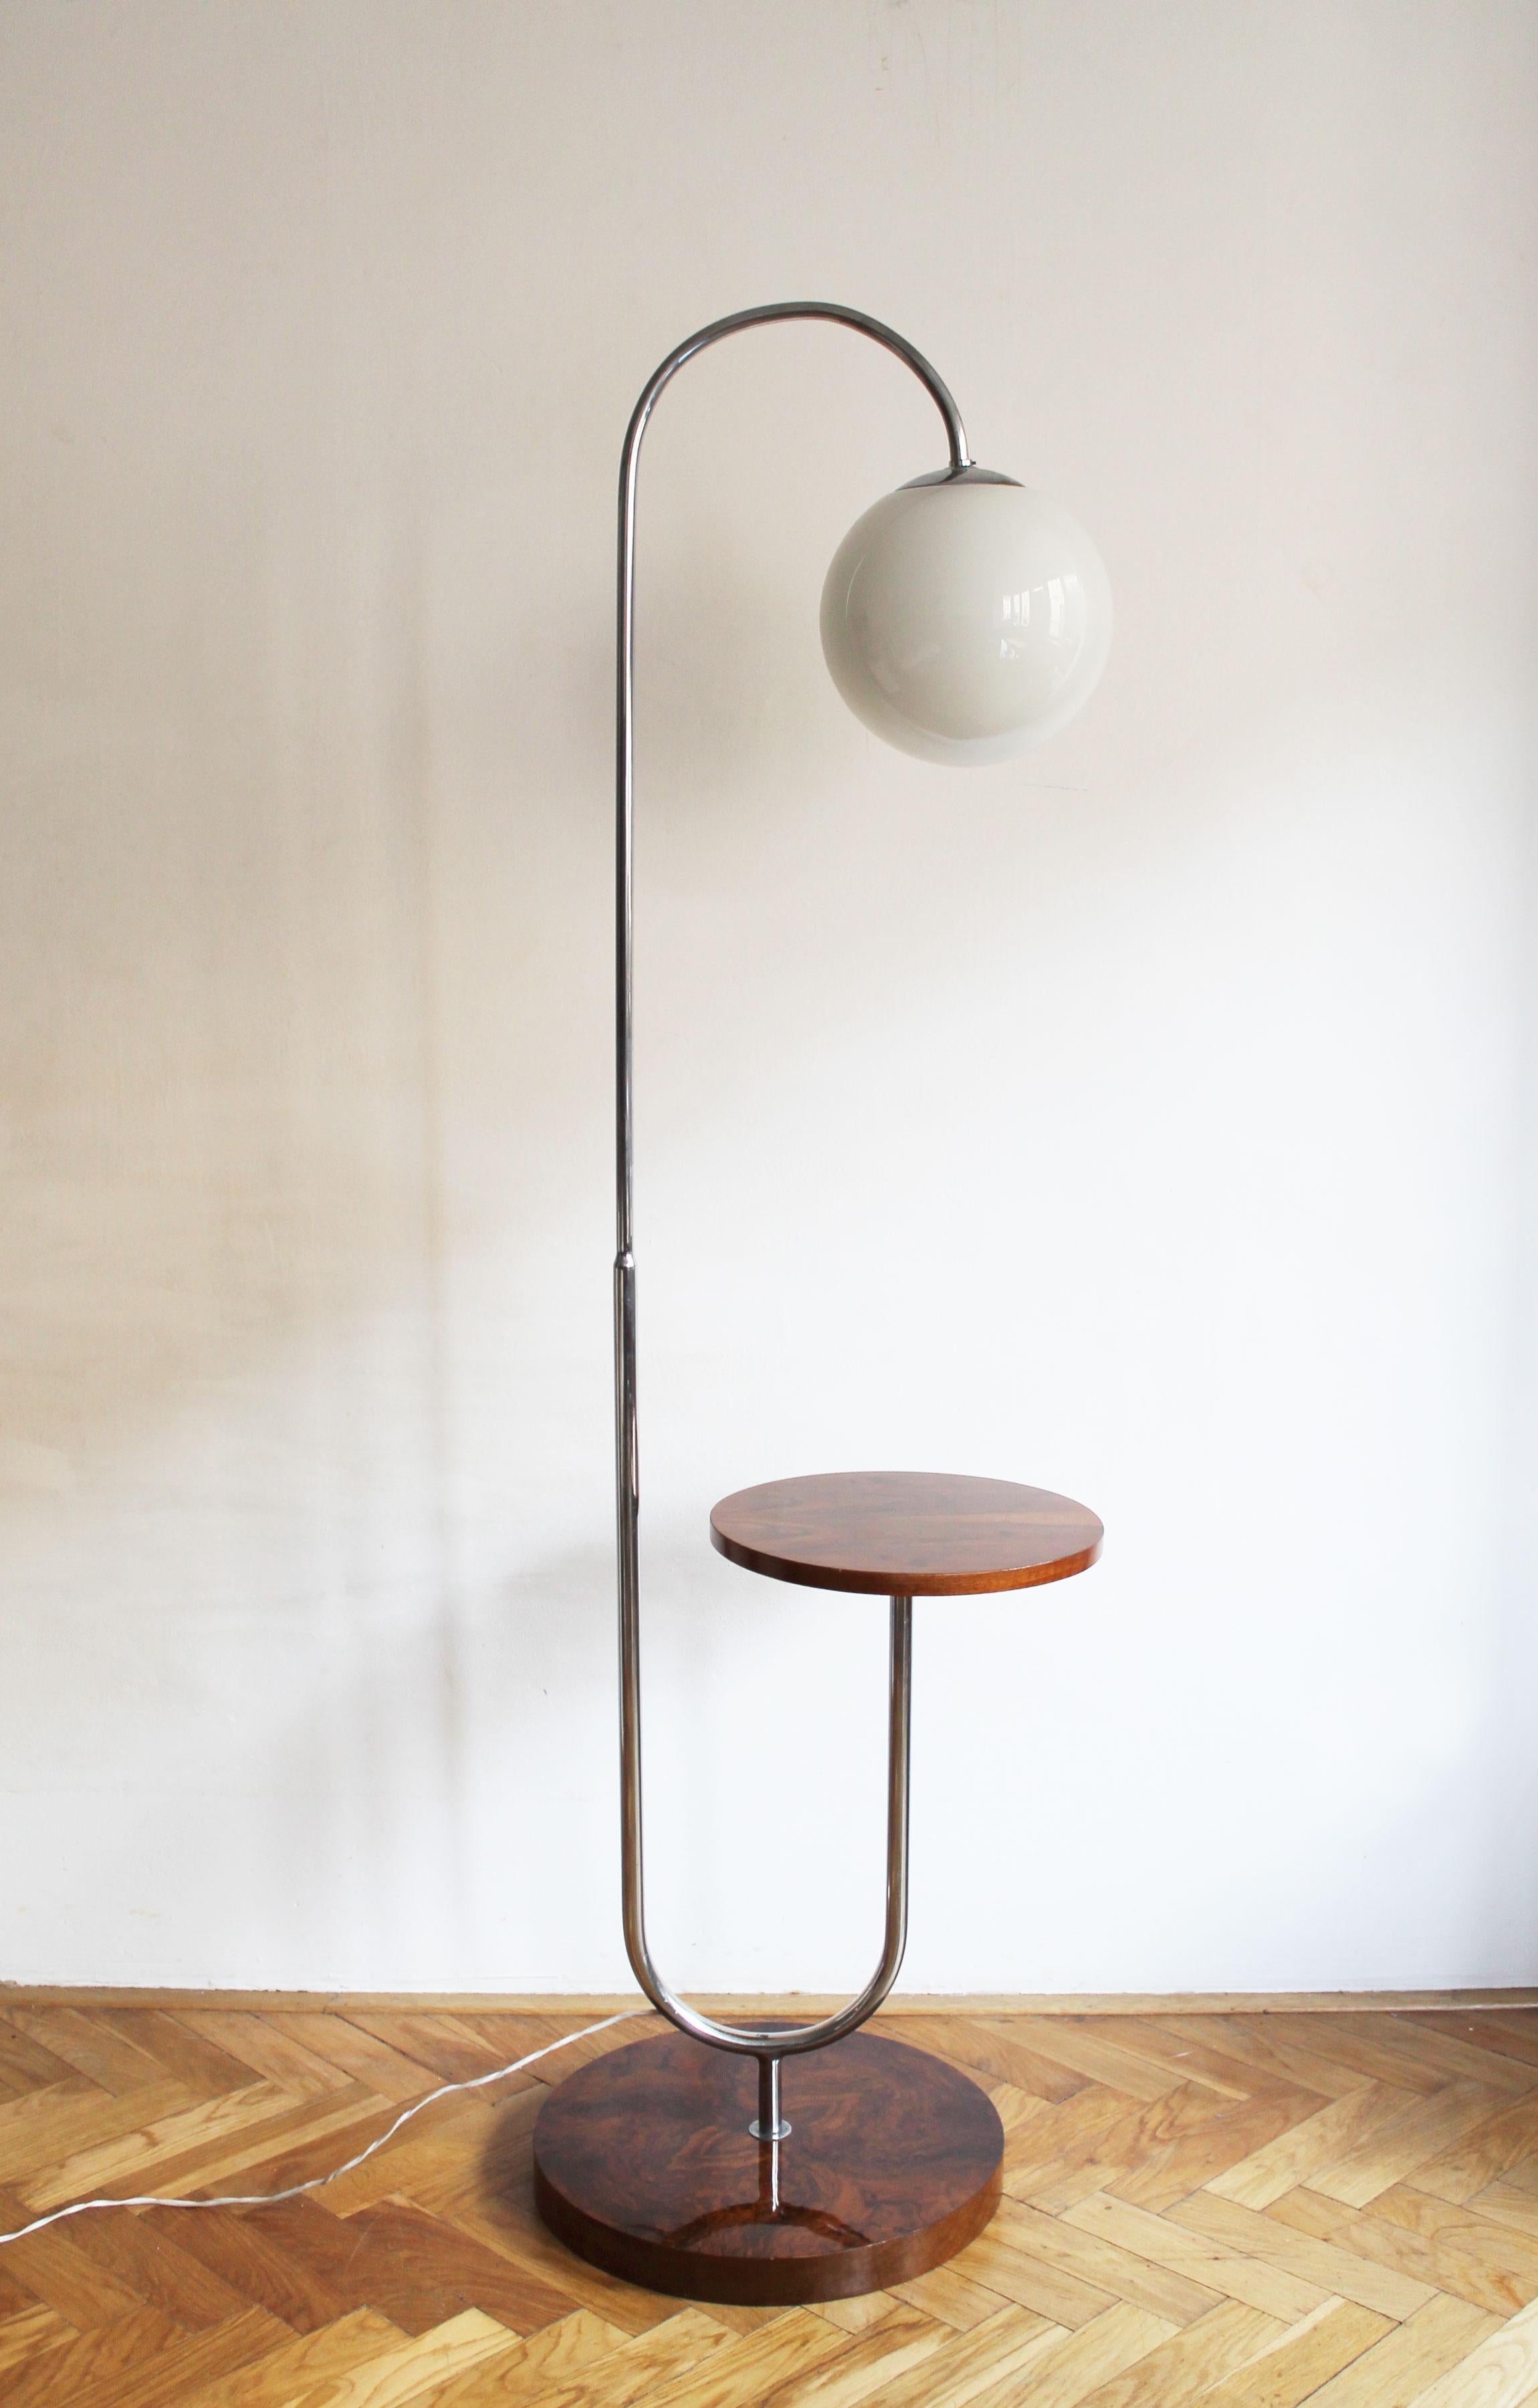 This Modernist floor lamp is believed to be designed by Robert Slezak (sometimes the design is also attributed to the Czech Modernist architect Ladislav Zak) and produced by The Slezakovy Zavody Steel Furniture Company in 1930s Czechoslovakia.